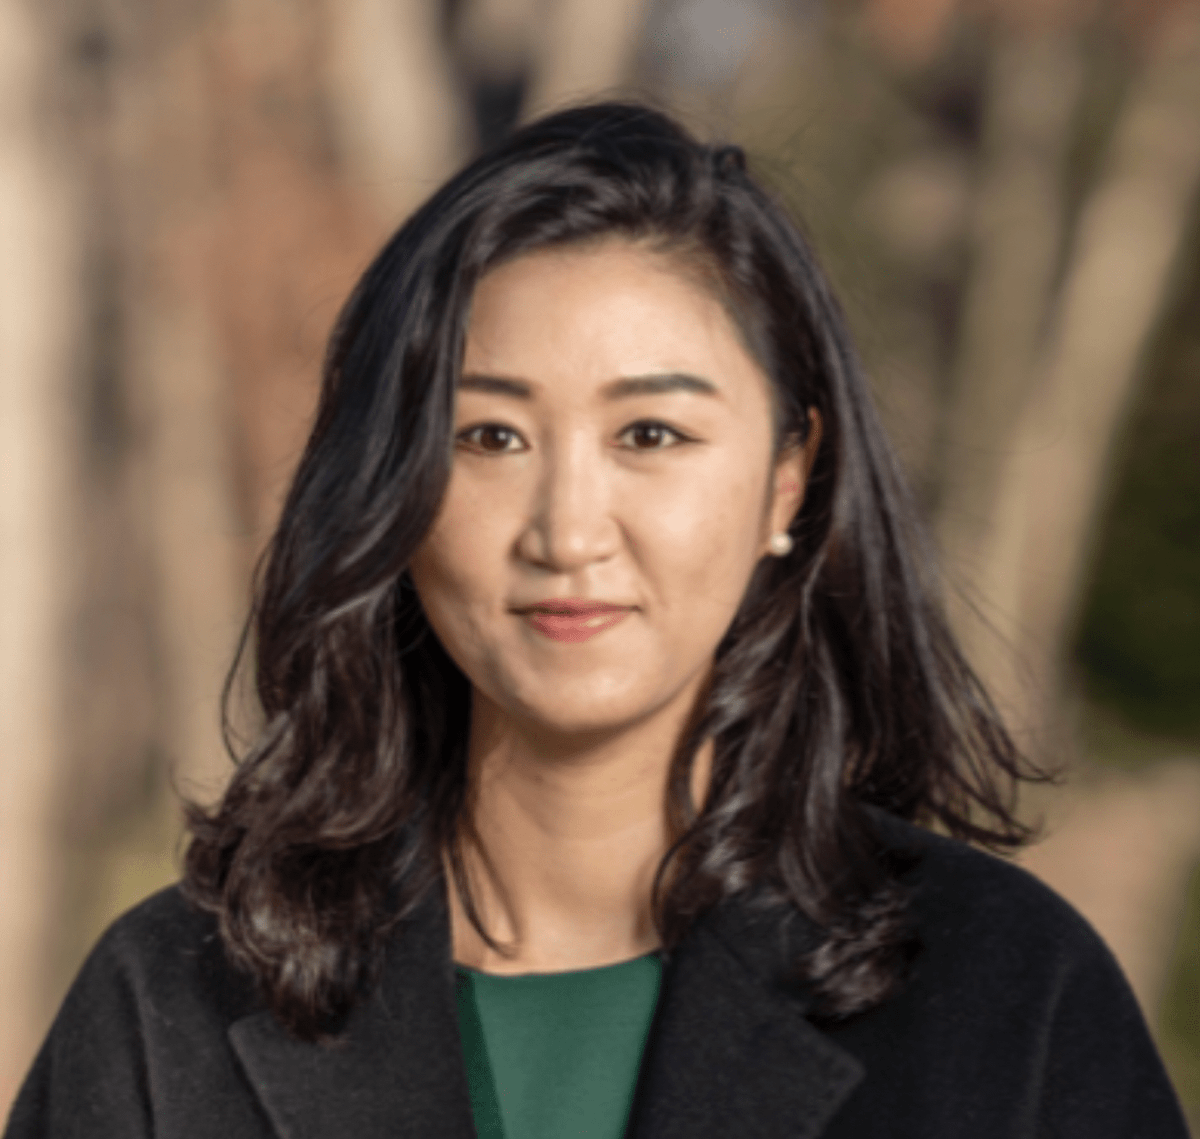 EPOVB & Political Psychology Summer Speaker Series resumes today (8/9) at noon (CT)! Amber Spry @amber_spry will present on identity inventories and Eunji Kim @eunjikim_media will present on Fox News effects. See section website for Zoom link: connect.apsanet.org/s28/seminar-se…